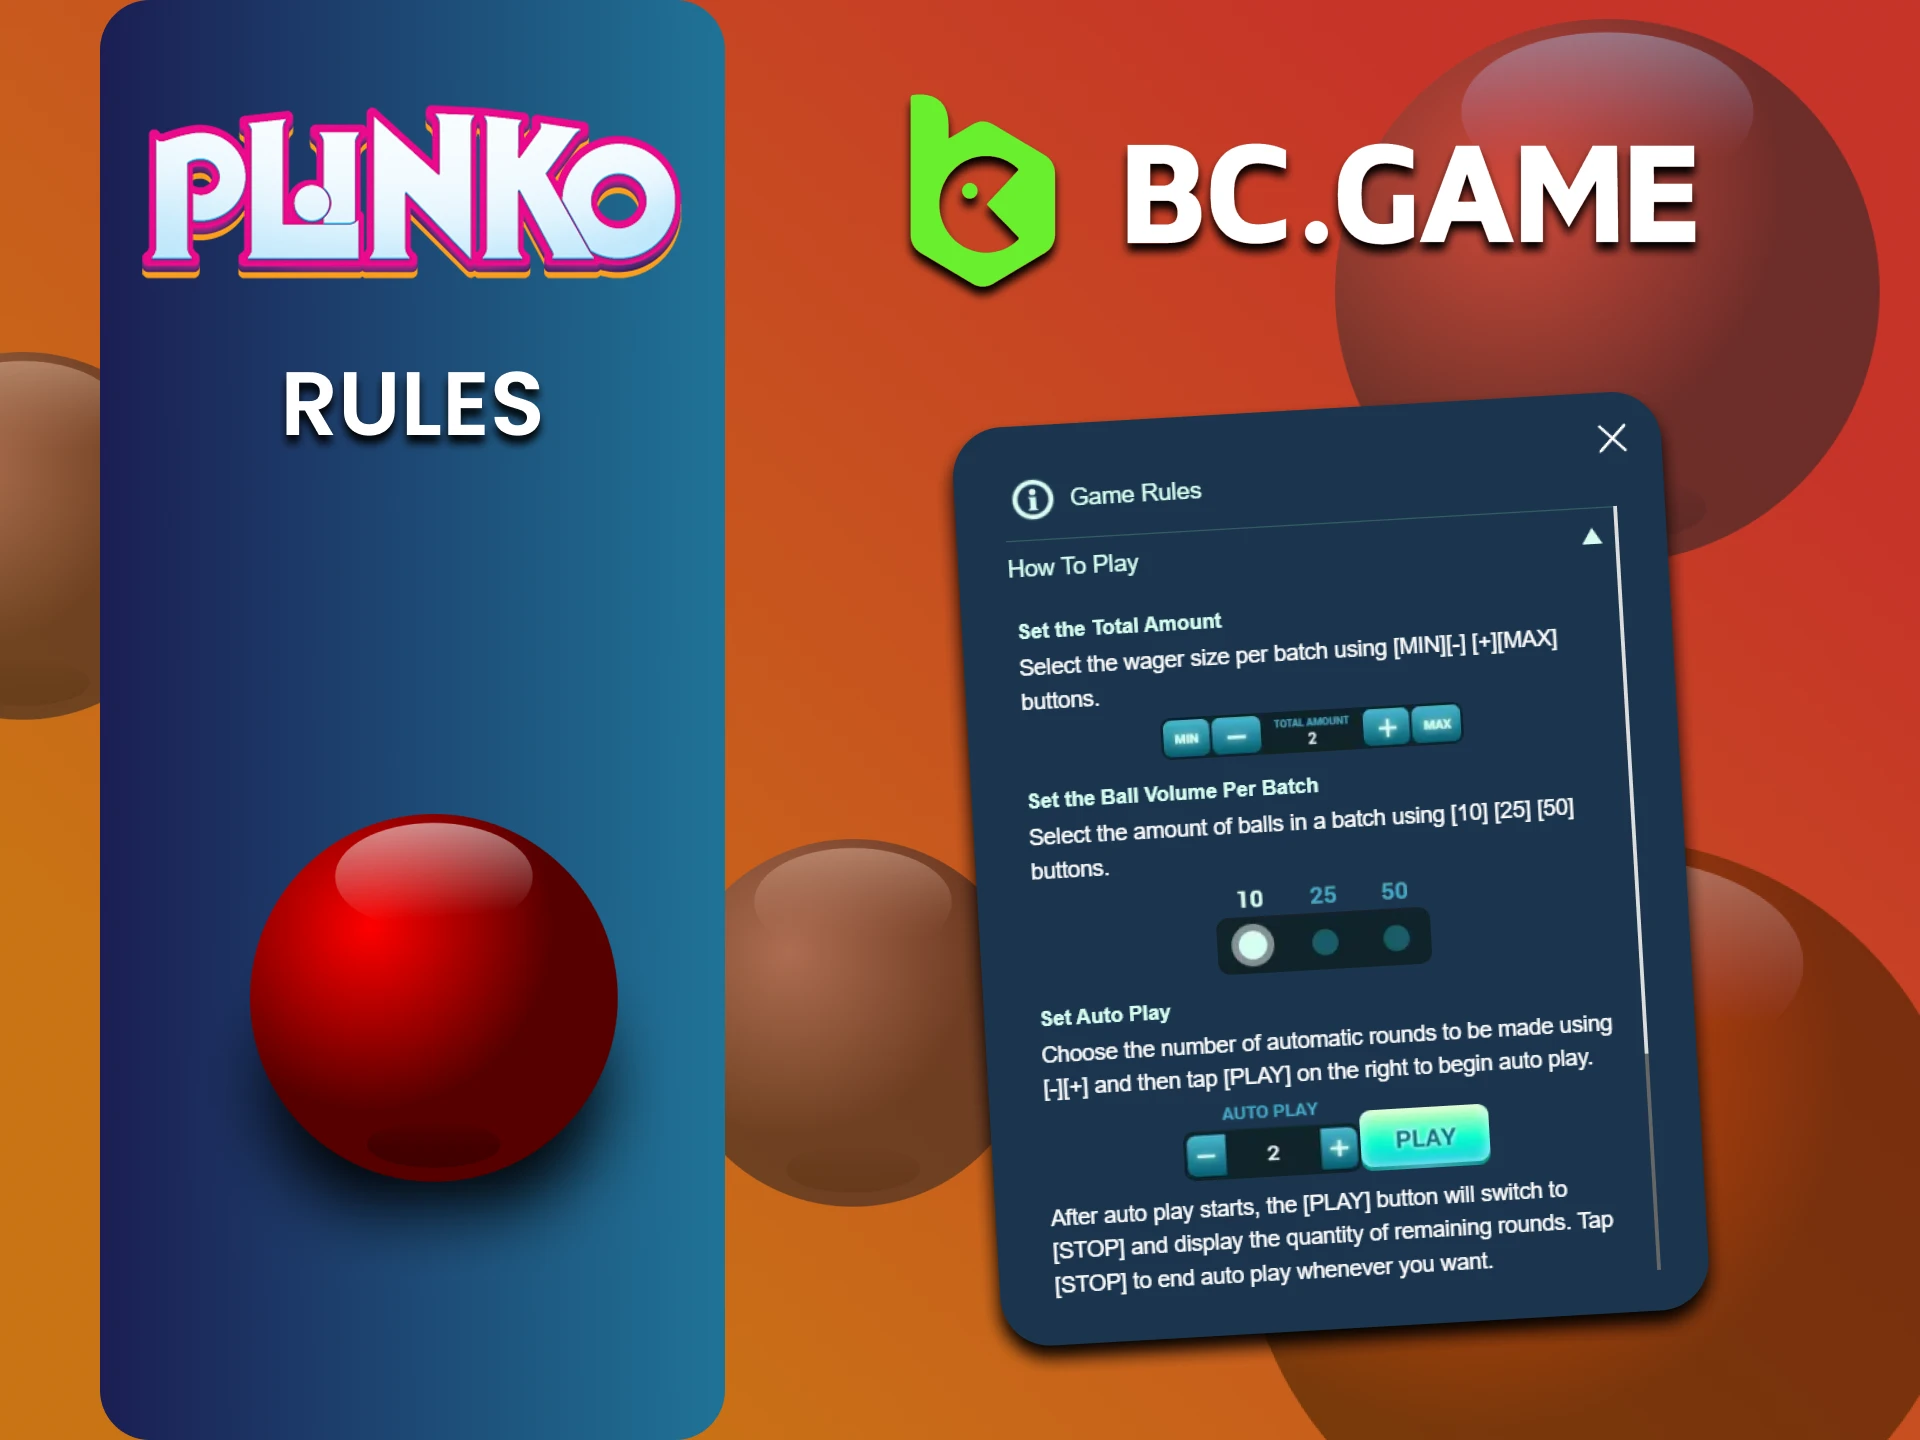 Be sure to study the rules of the Plinko game on the BCGame website.